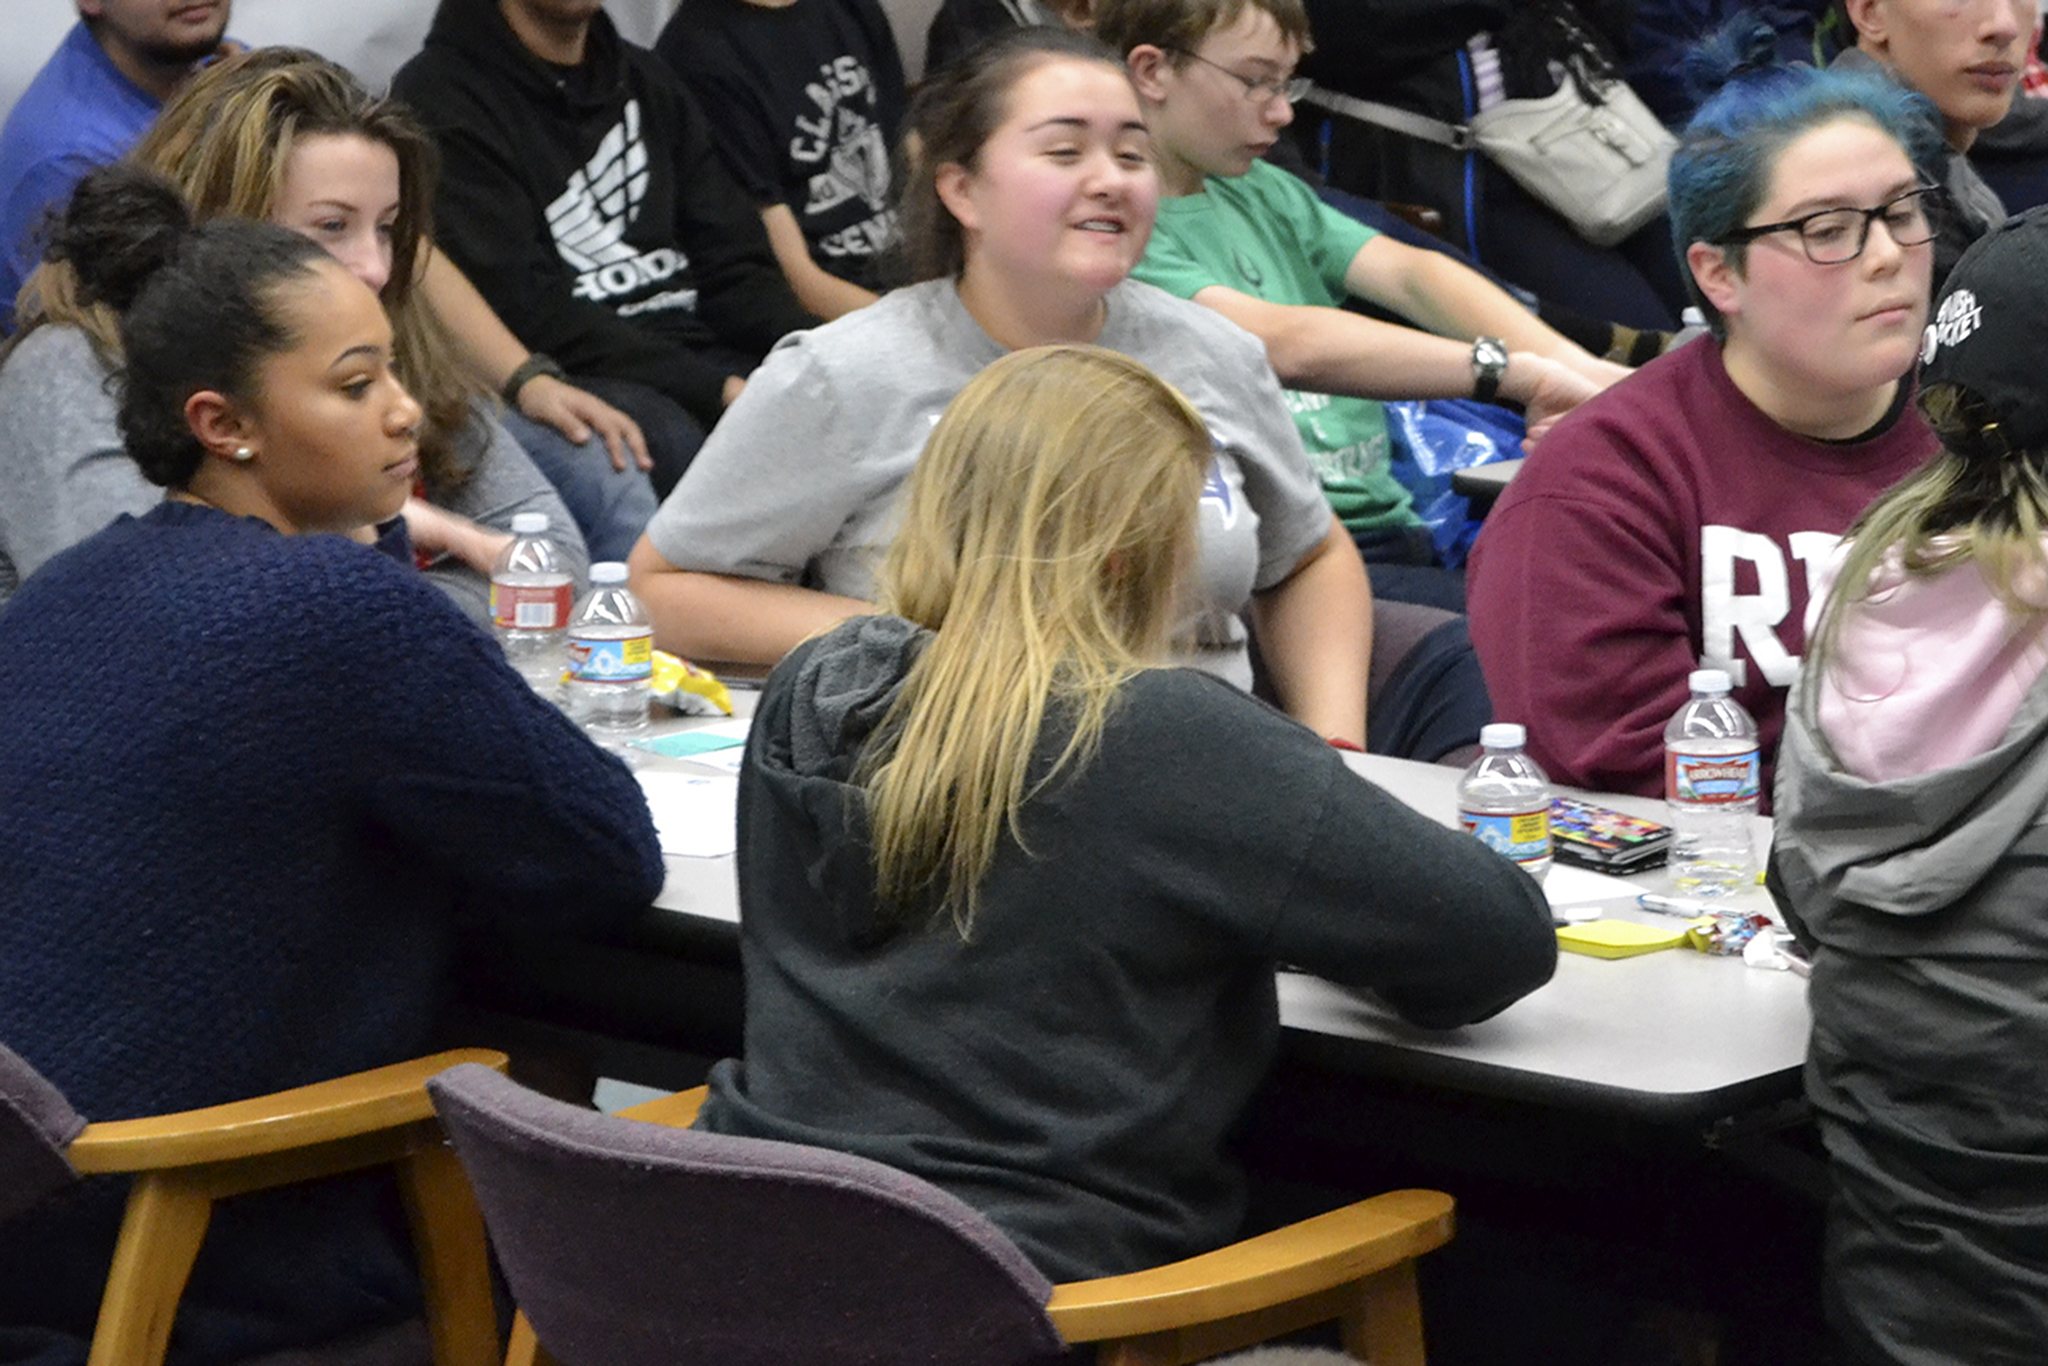 Chante Lee, Chloe Starkenburg and Keegan Samaniego sit with other friends at a table at the meeting for MG. (Steve Powell/Staff Photo)